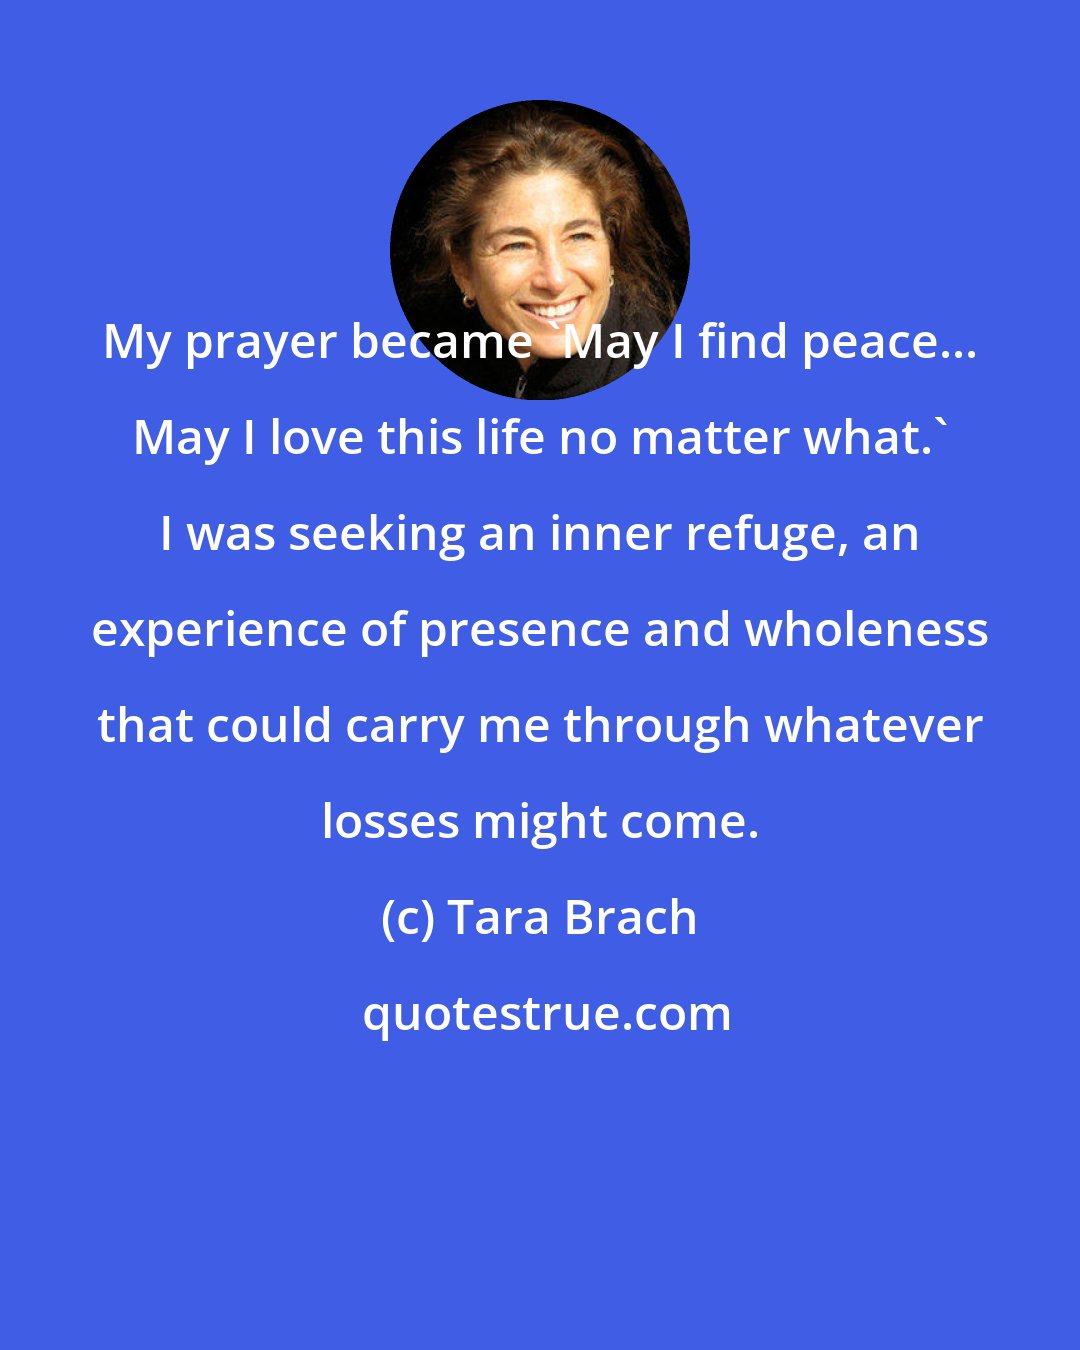 Tara Brach: My prayer became 'May I find peace... May I love this life no matter what.' I was seeking an inner refuge, an experience of presence and wholeness that could carry me through whatever losses might come.